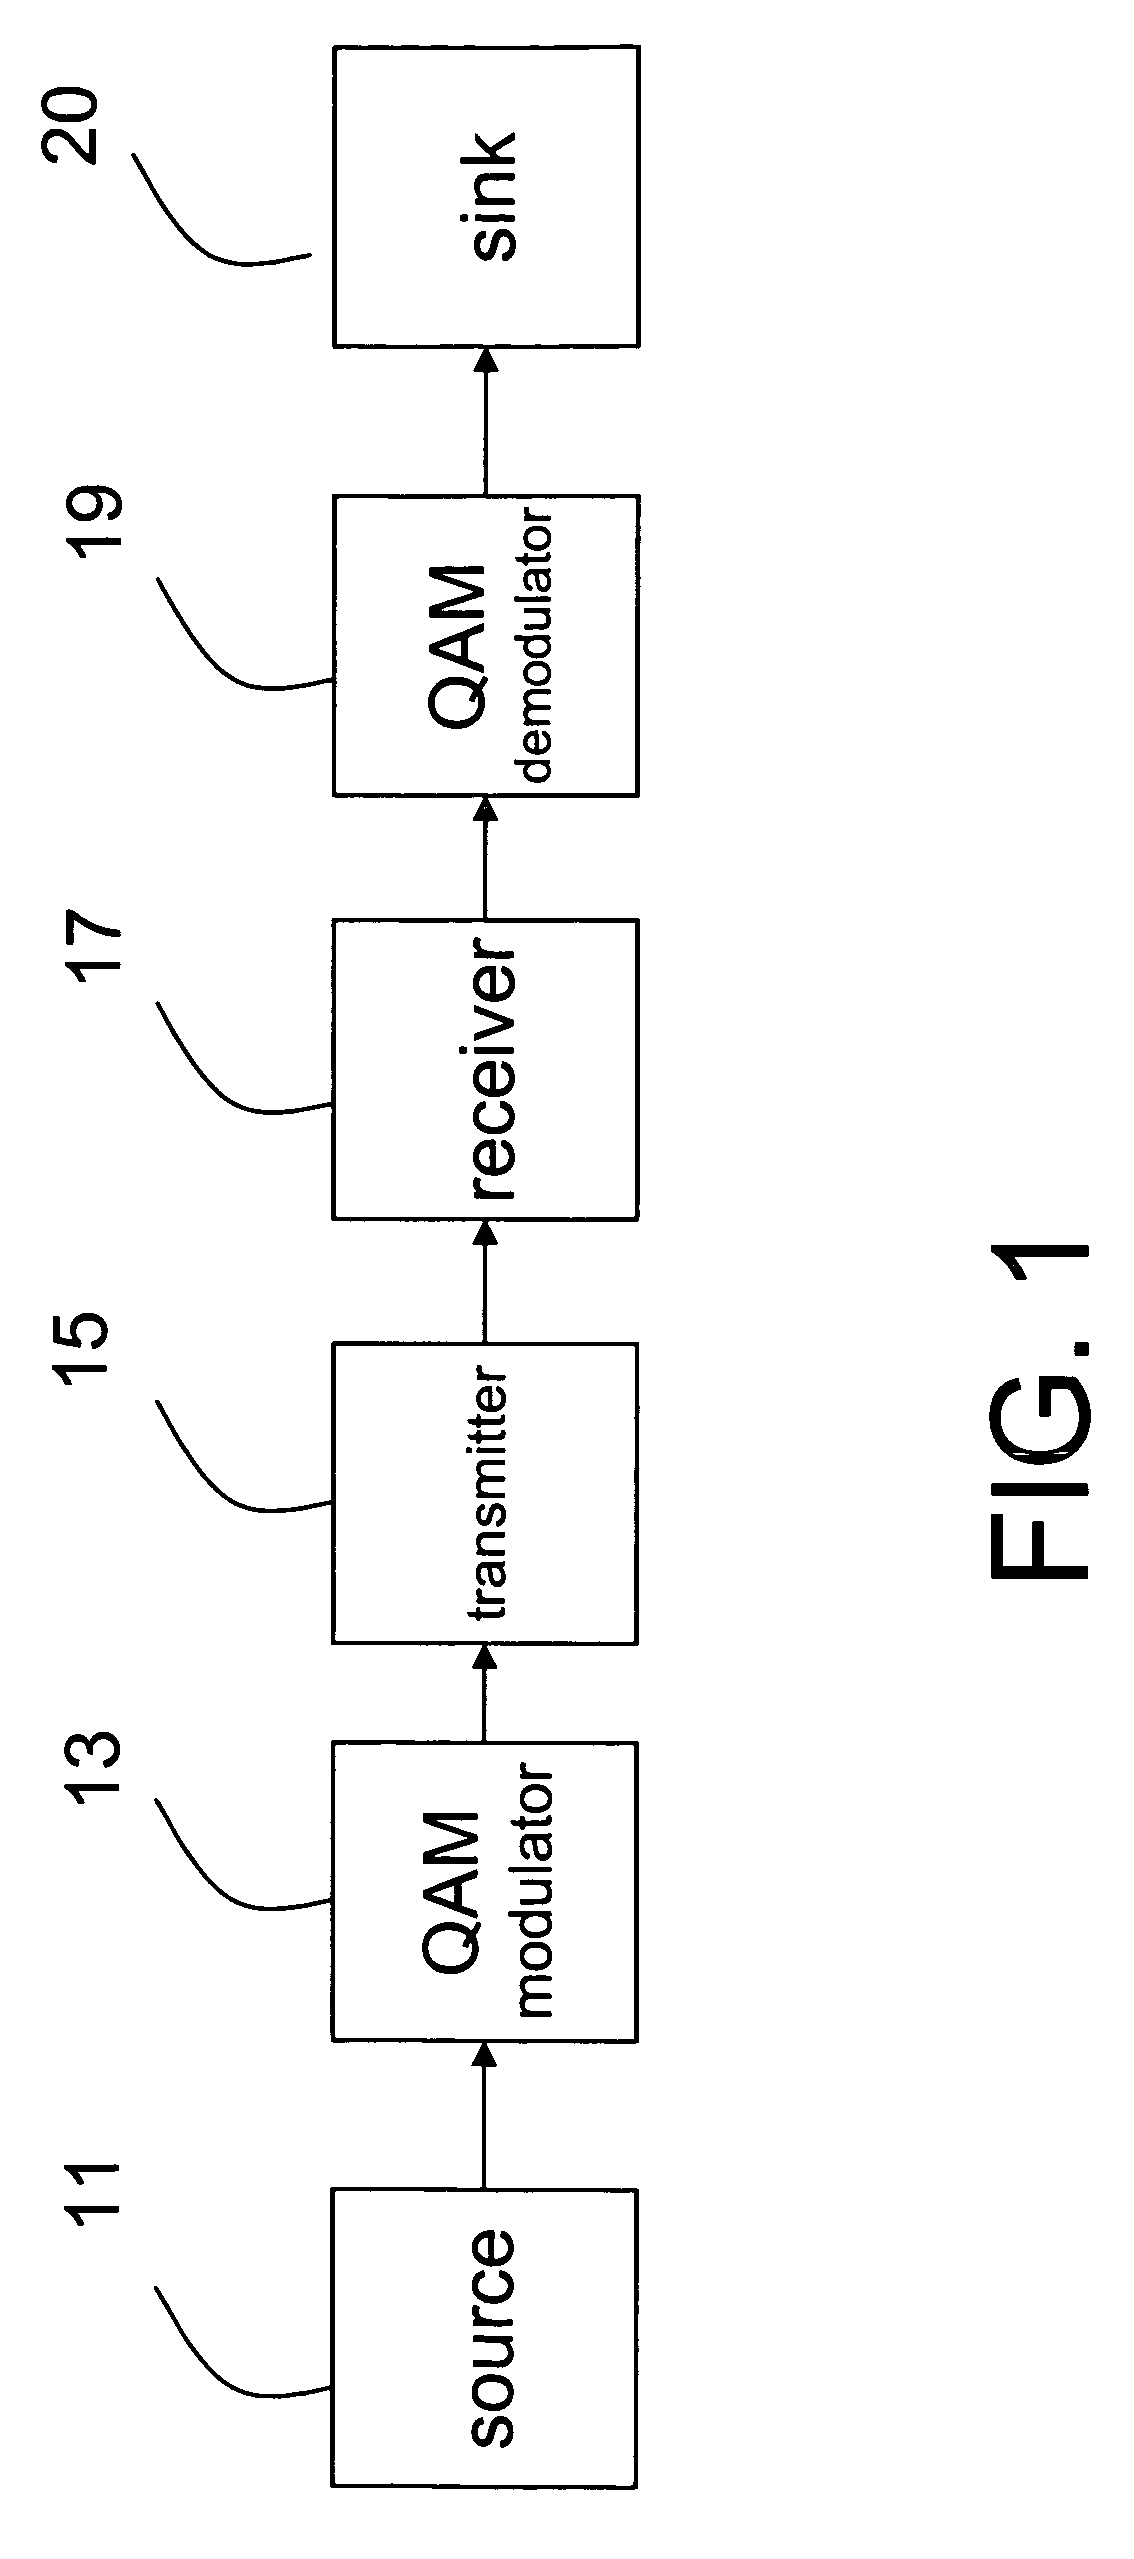 QAM mapping and bit labeling or bit-interleaved coded modulation